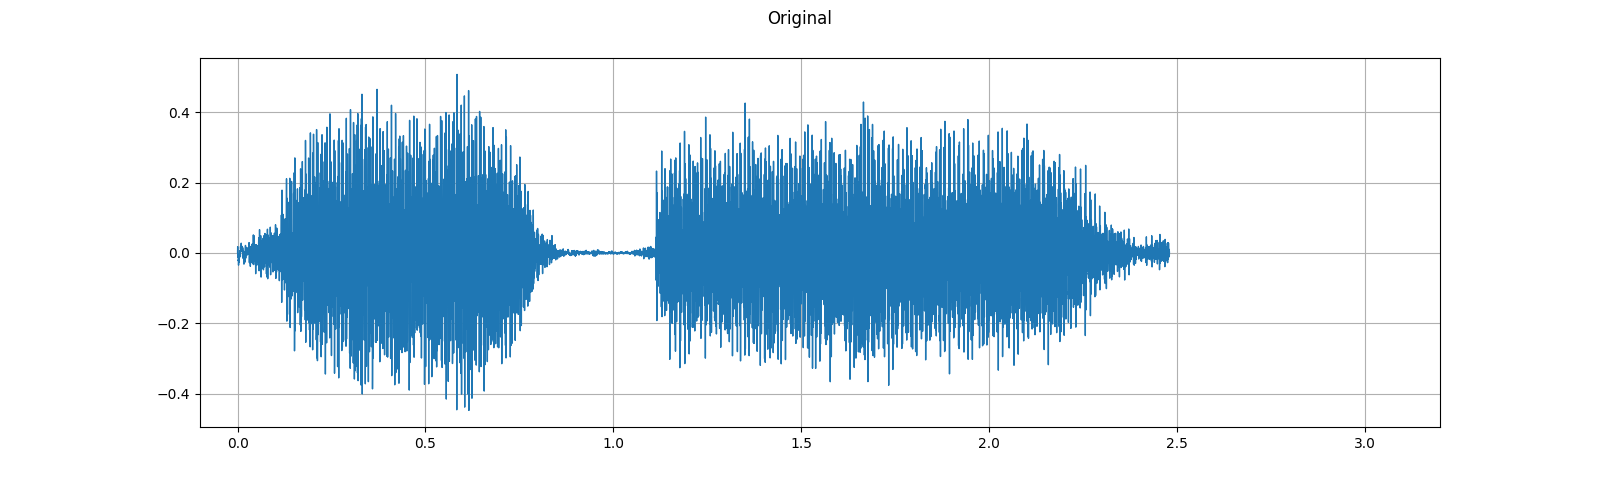 ../_images/sphx_glr_audio_preprocessing_tutorial_018.png